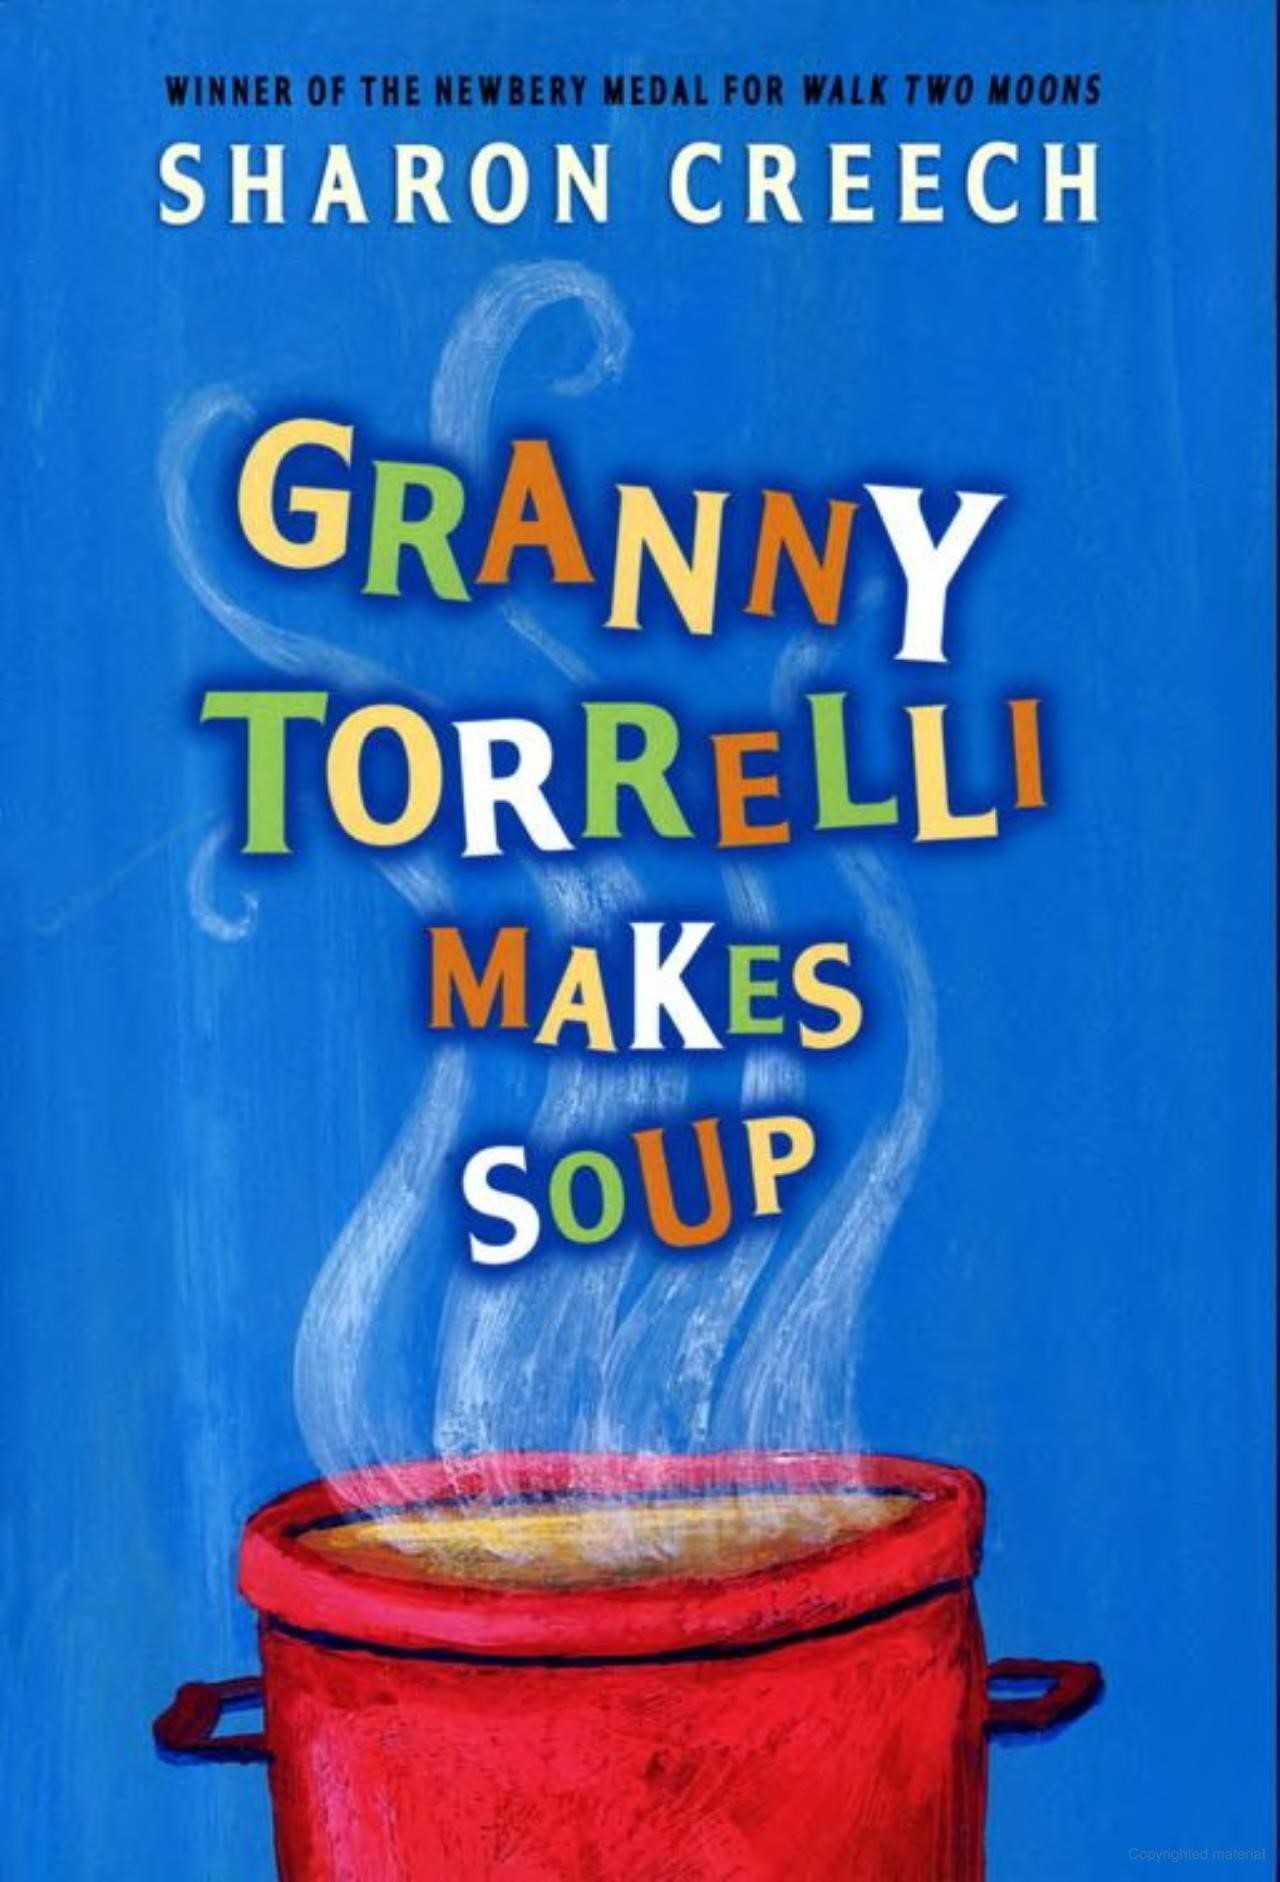 Steaming pot of soup with the book title above it